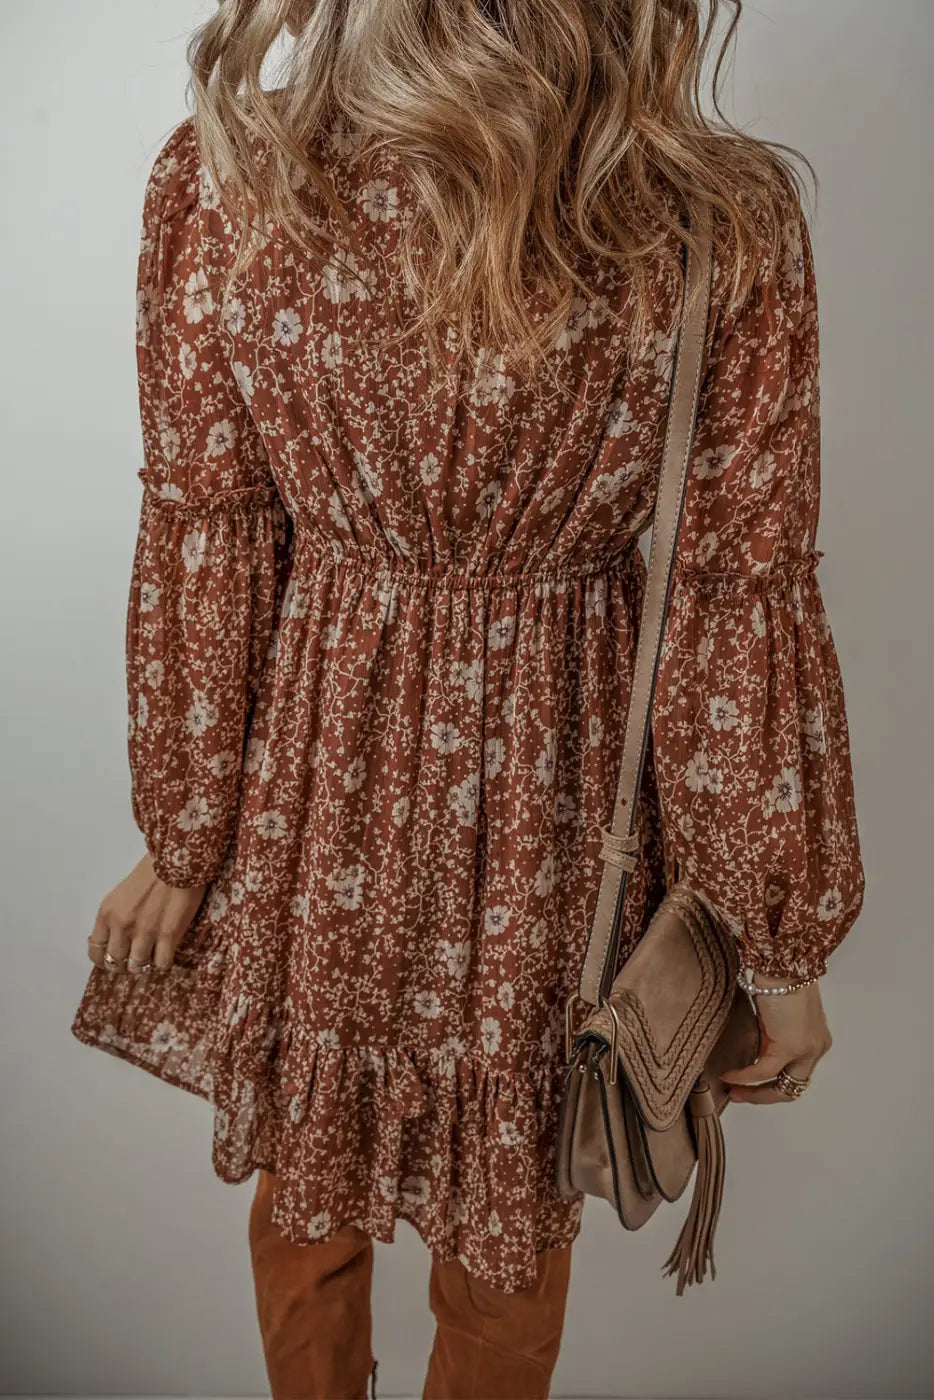 Ruffle romance boho dress: floral print, long sleeves, gathered waist for a relaxed style